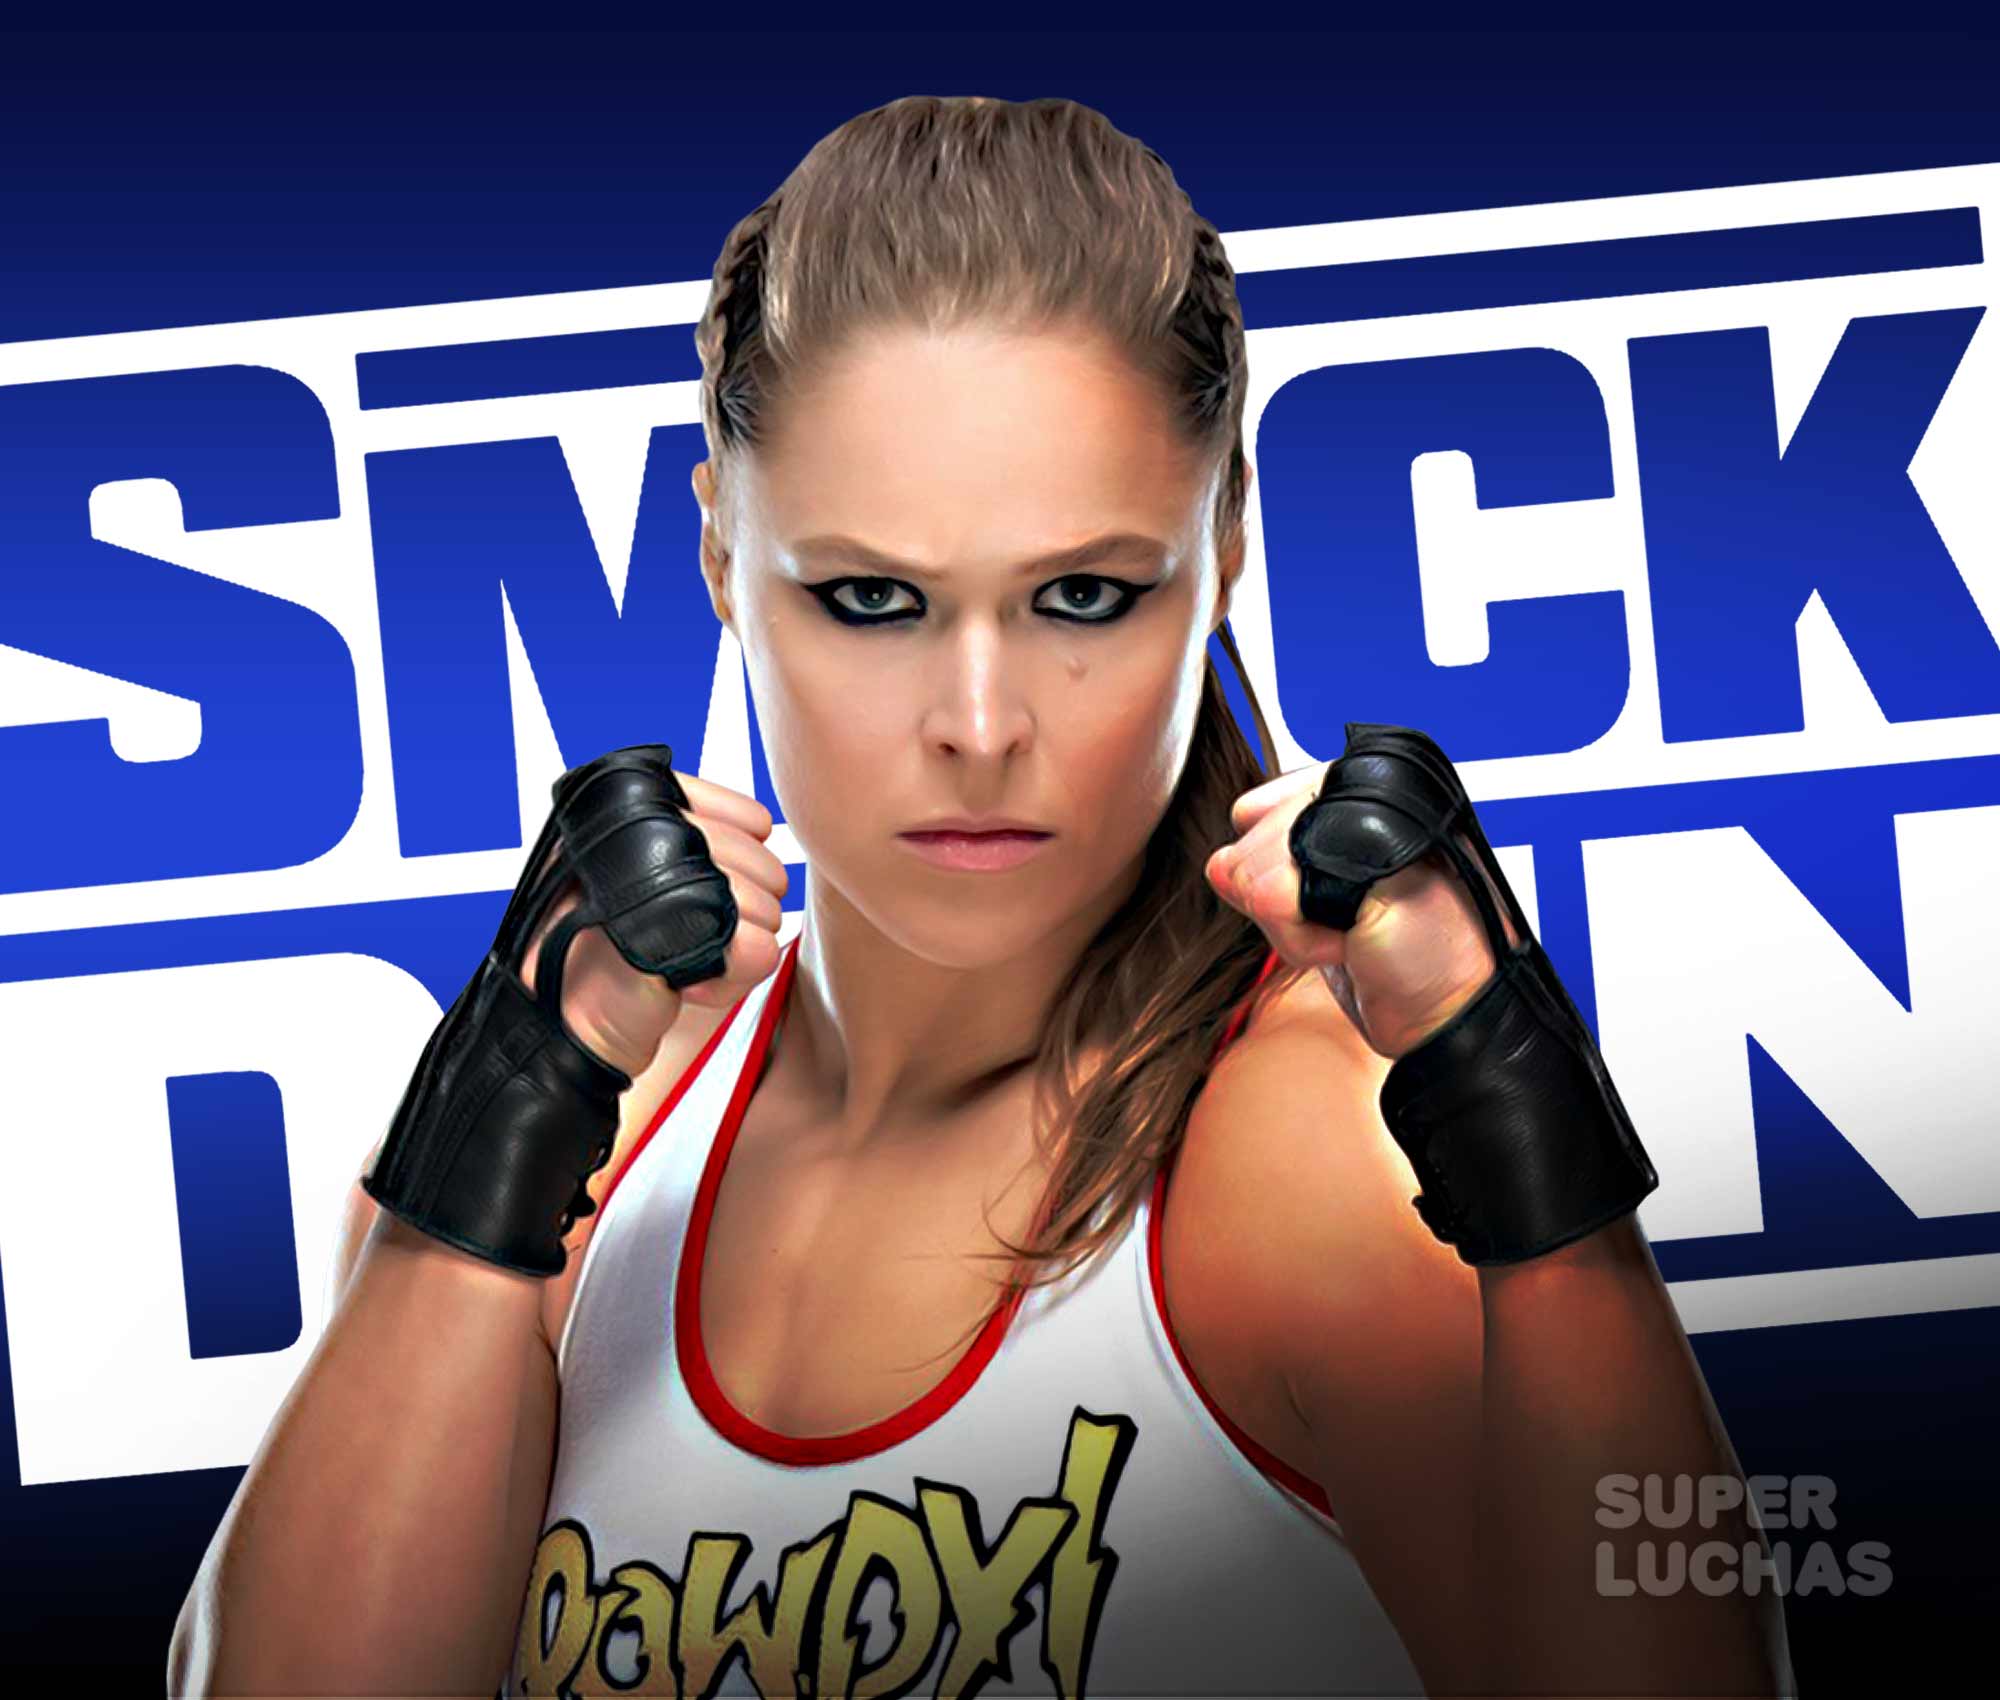 WWE SMACKDOWN February 4 2022 Live results Ronda